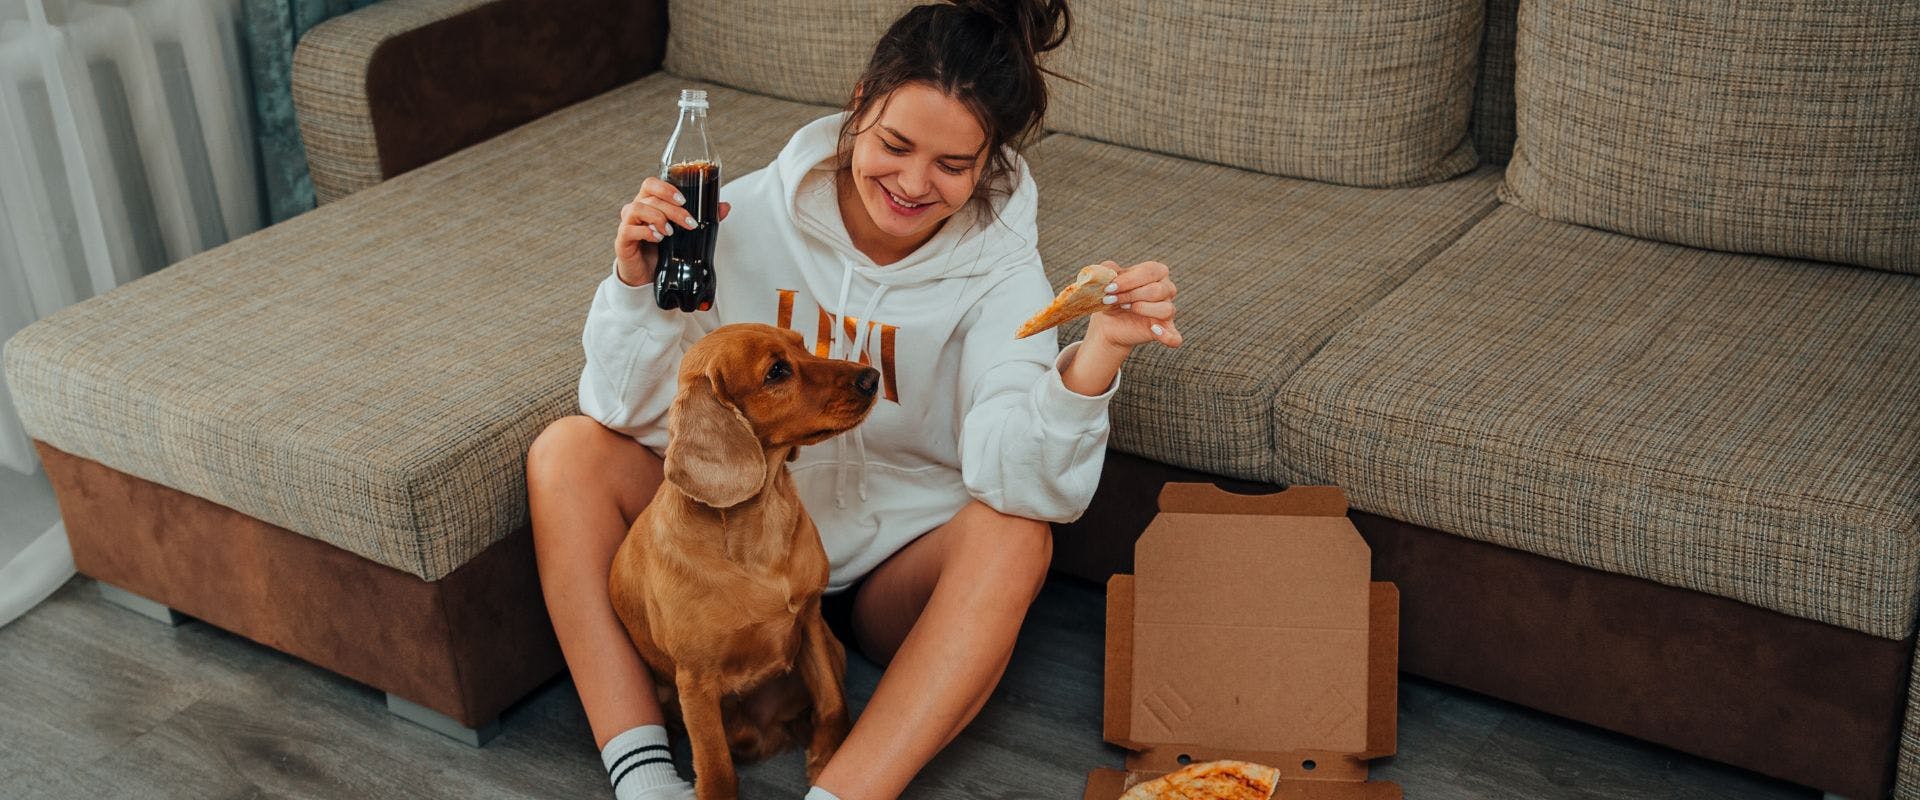 Person eating pizza and drinking cola with a Spaniel dog